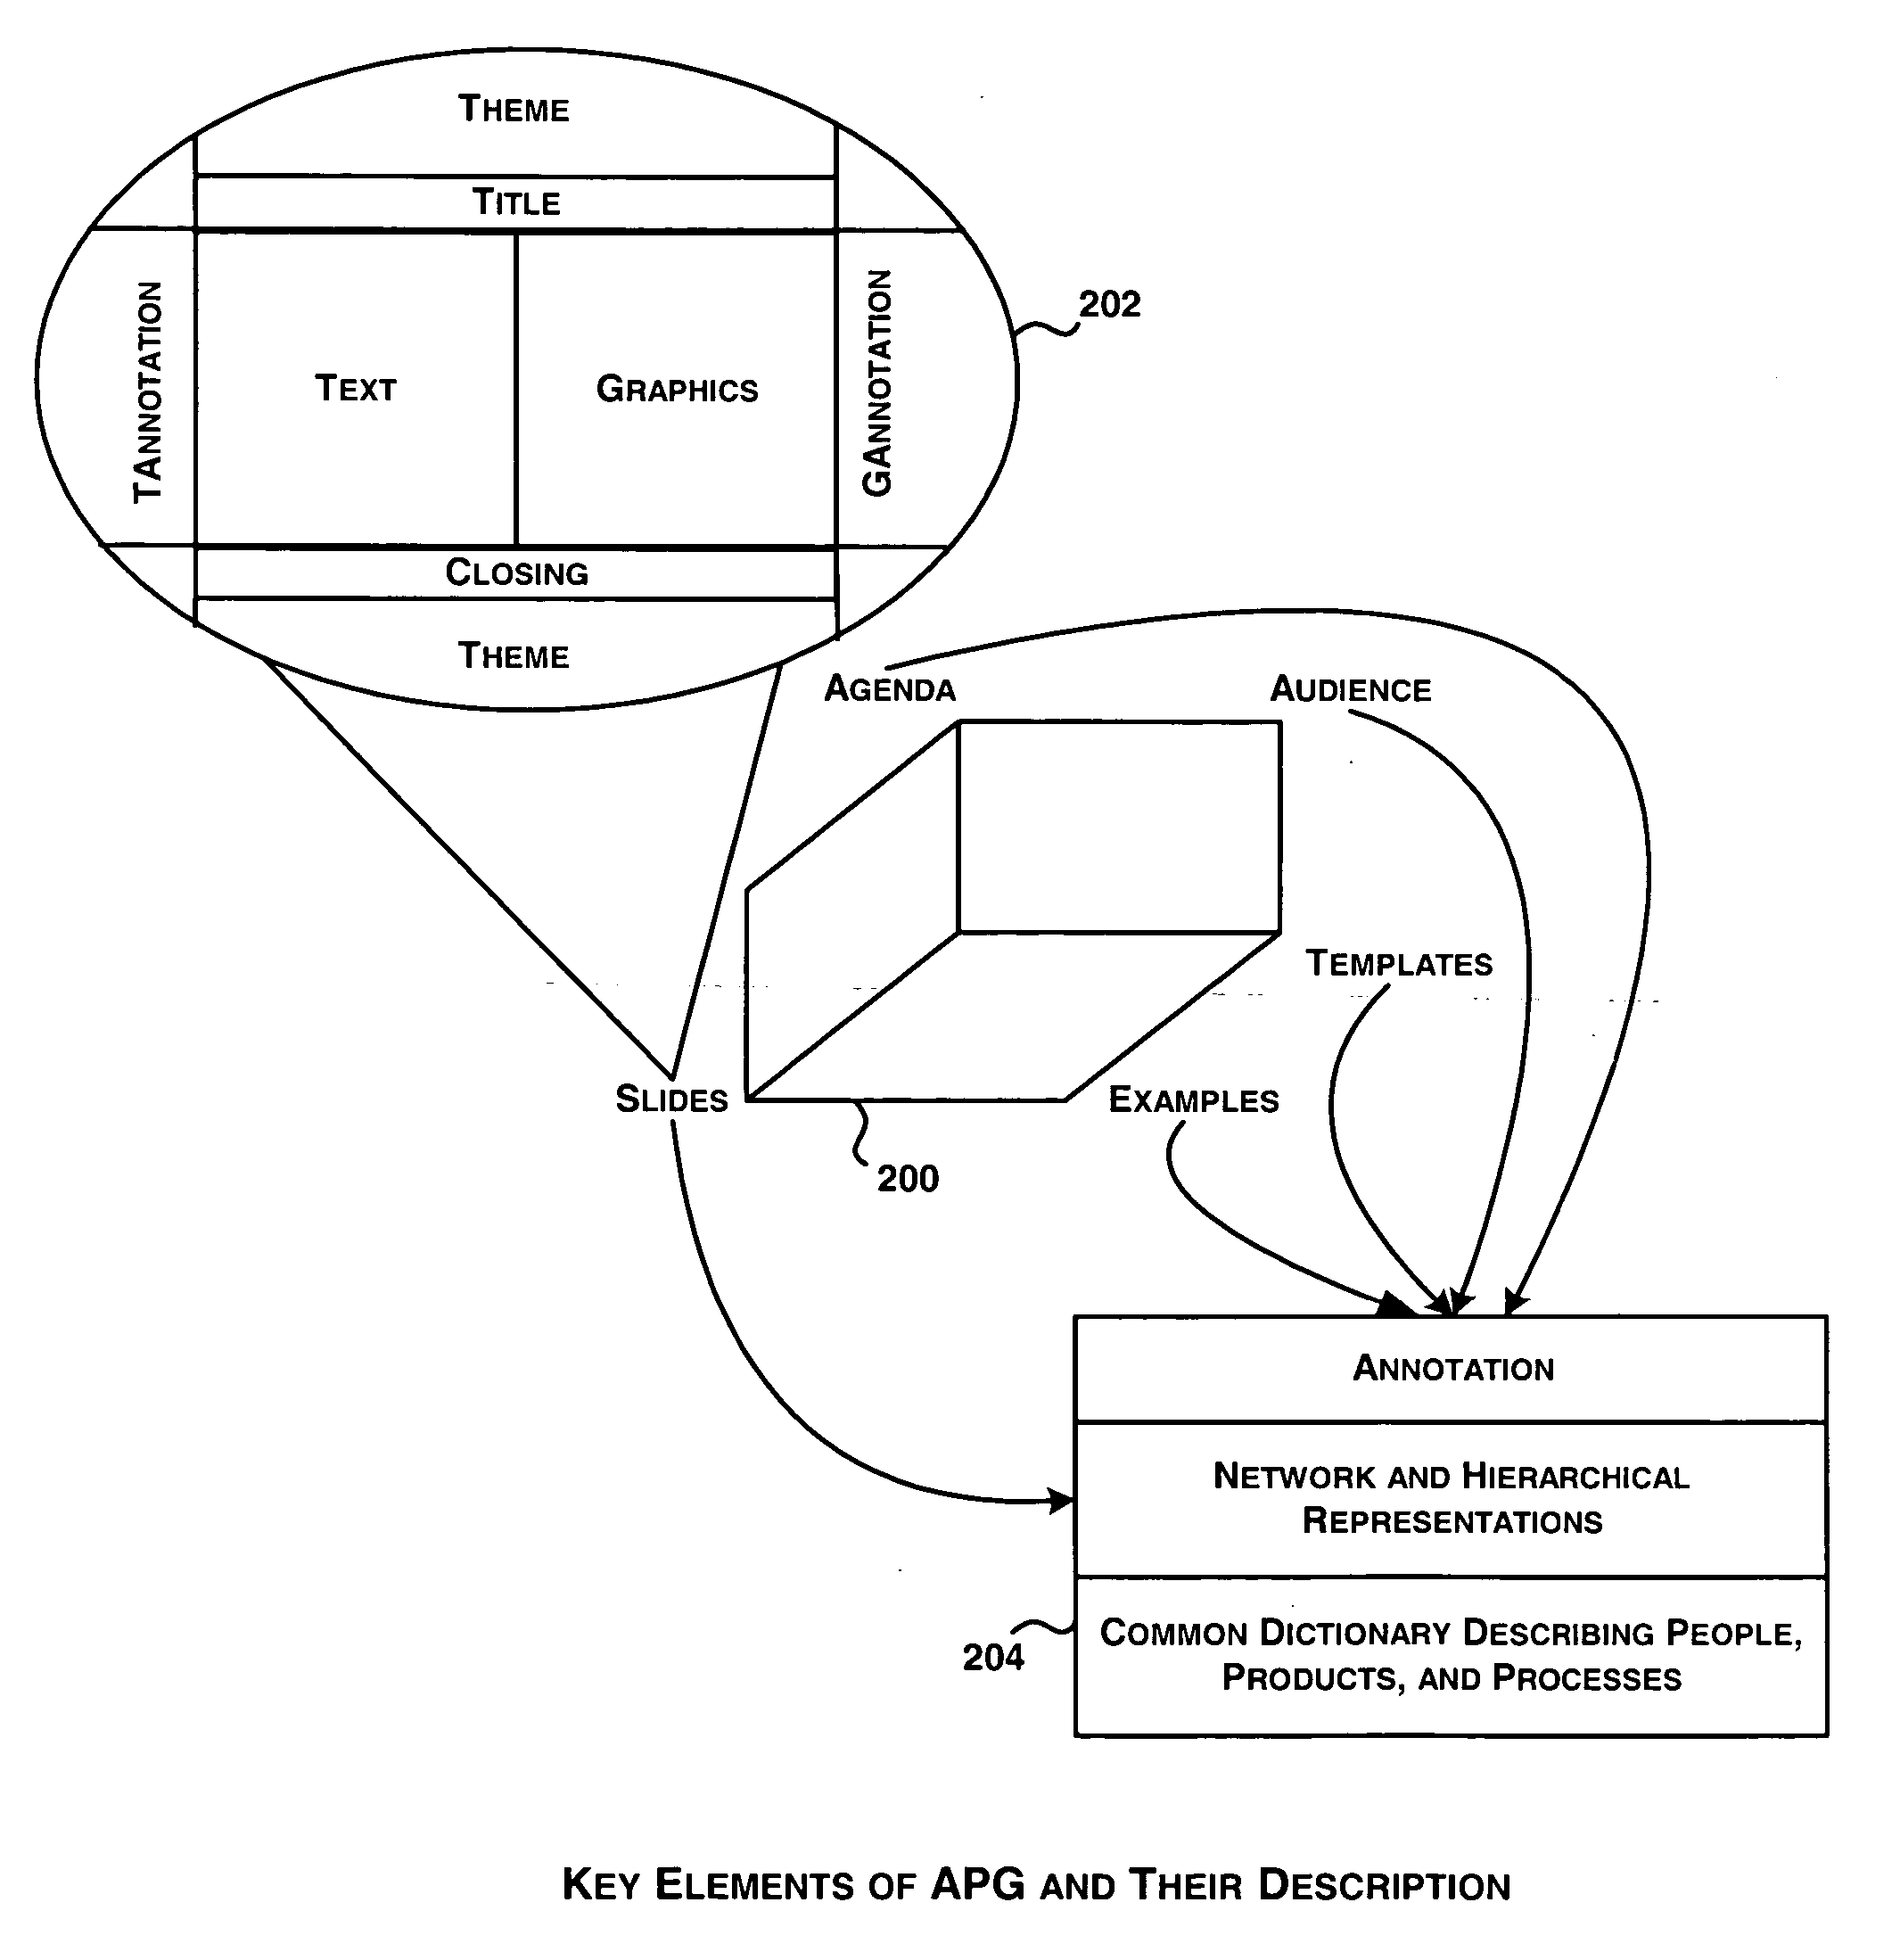 System and method for automatic generation of presentations based on agenda